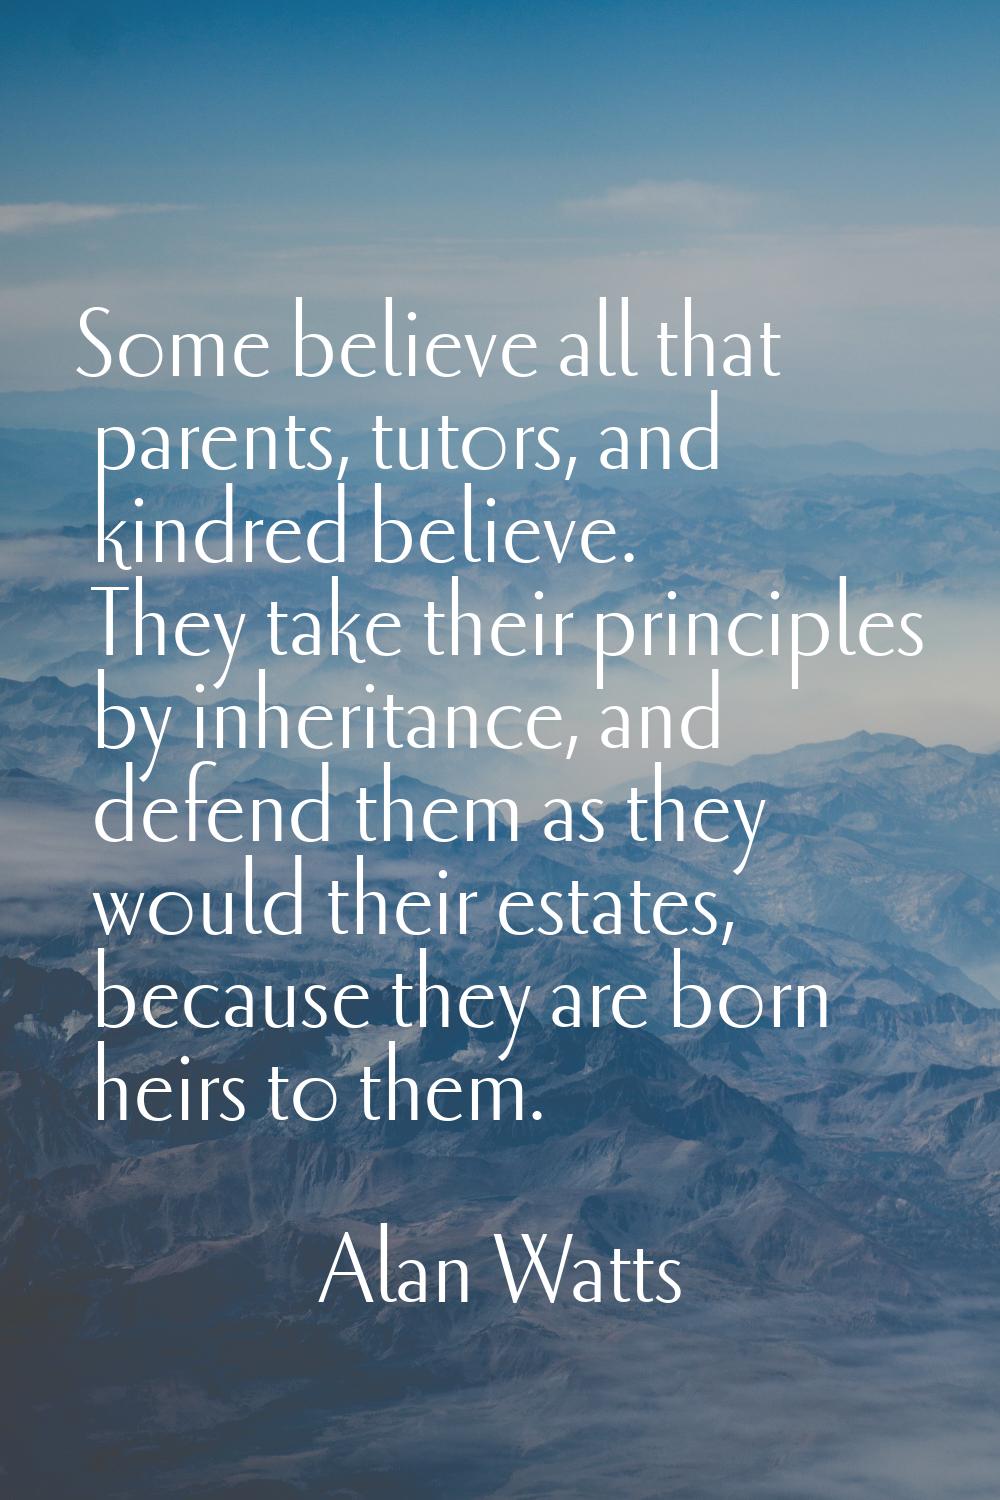 Some believe all that parents, tutors, and kindred believe. They take their principles by inheritan